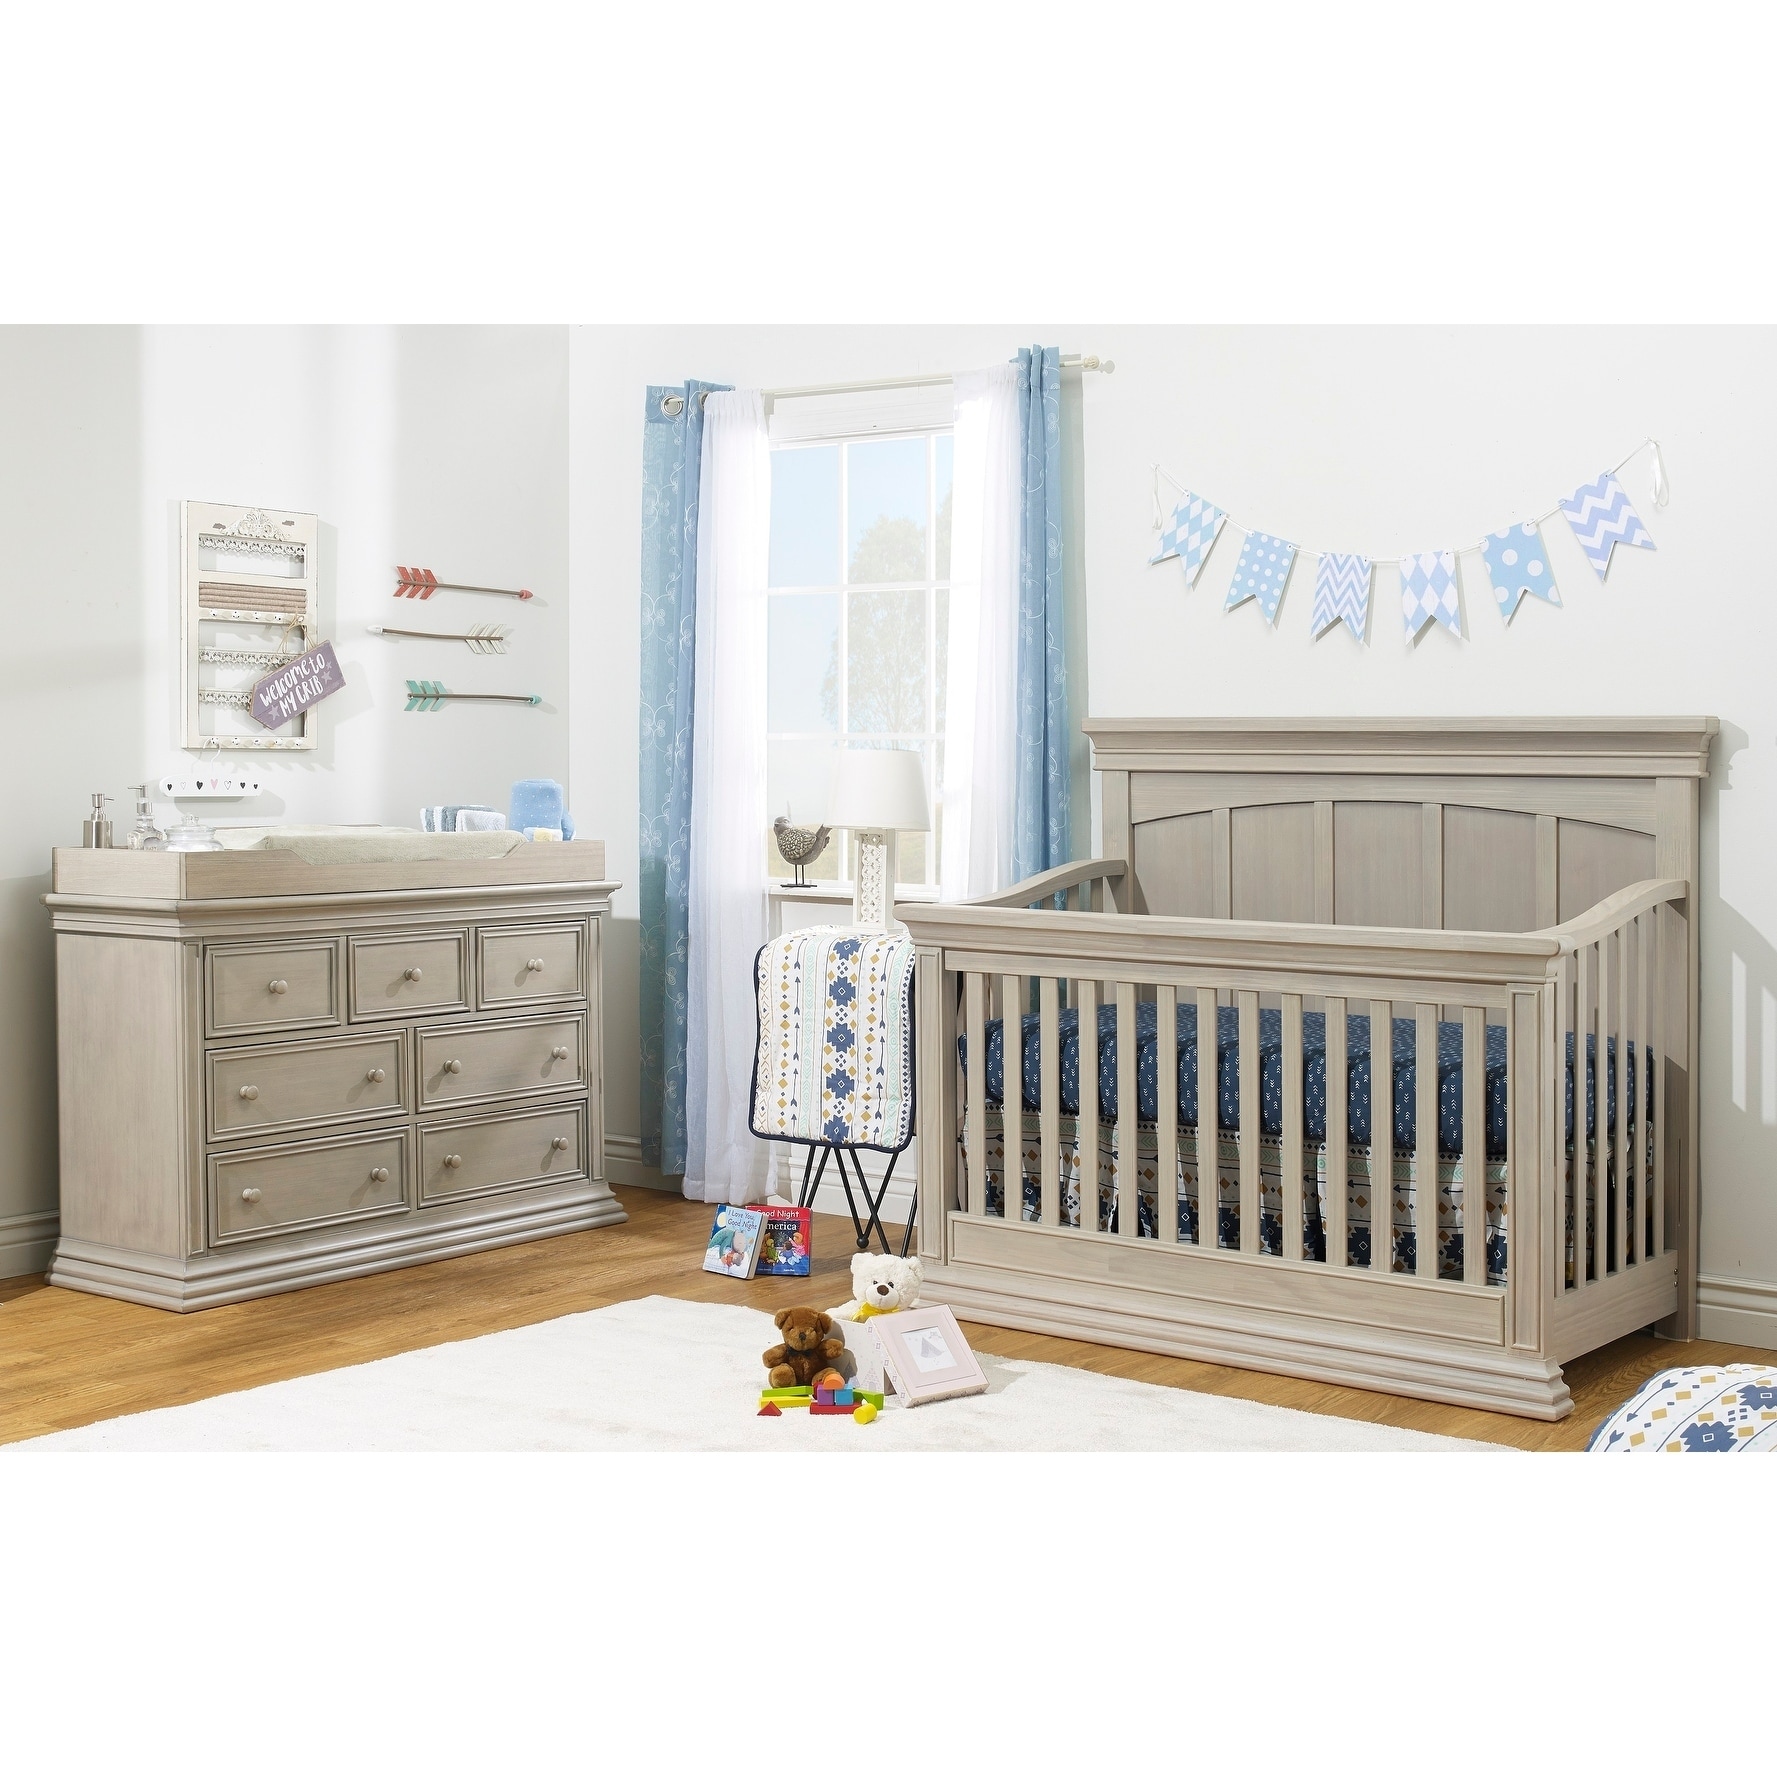 baby dresser with removable changing table